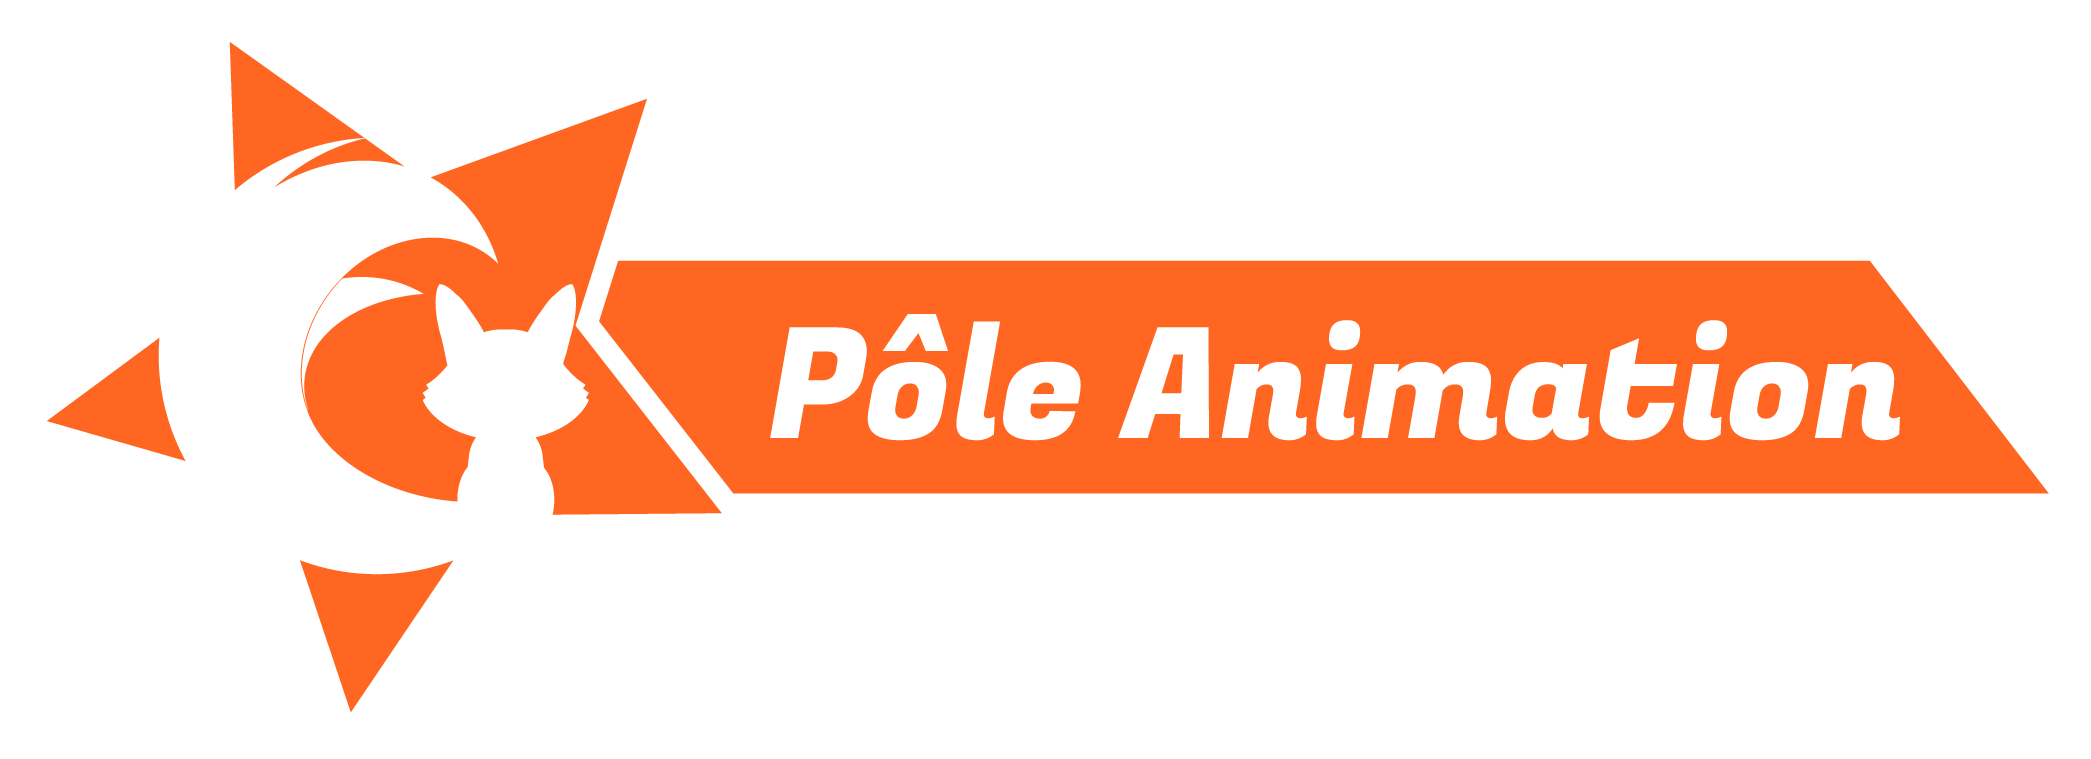 poleanimation.png